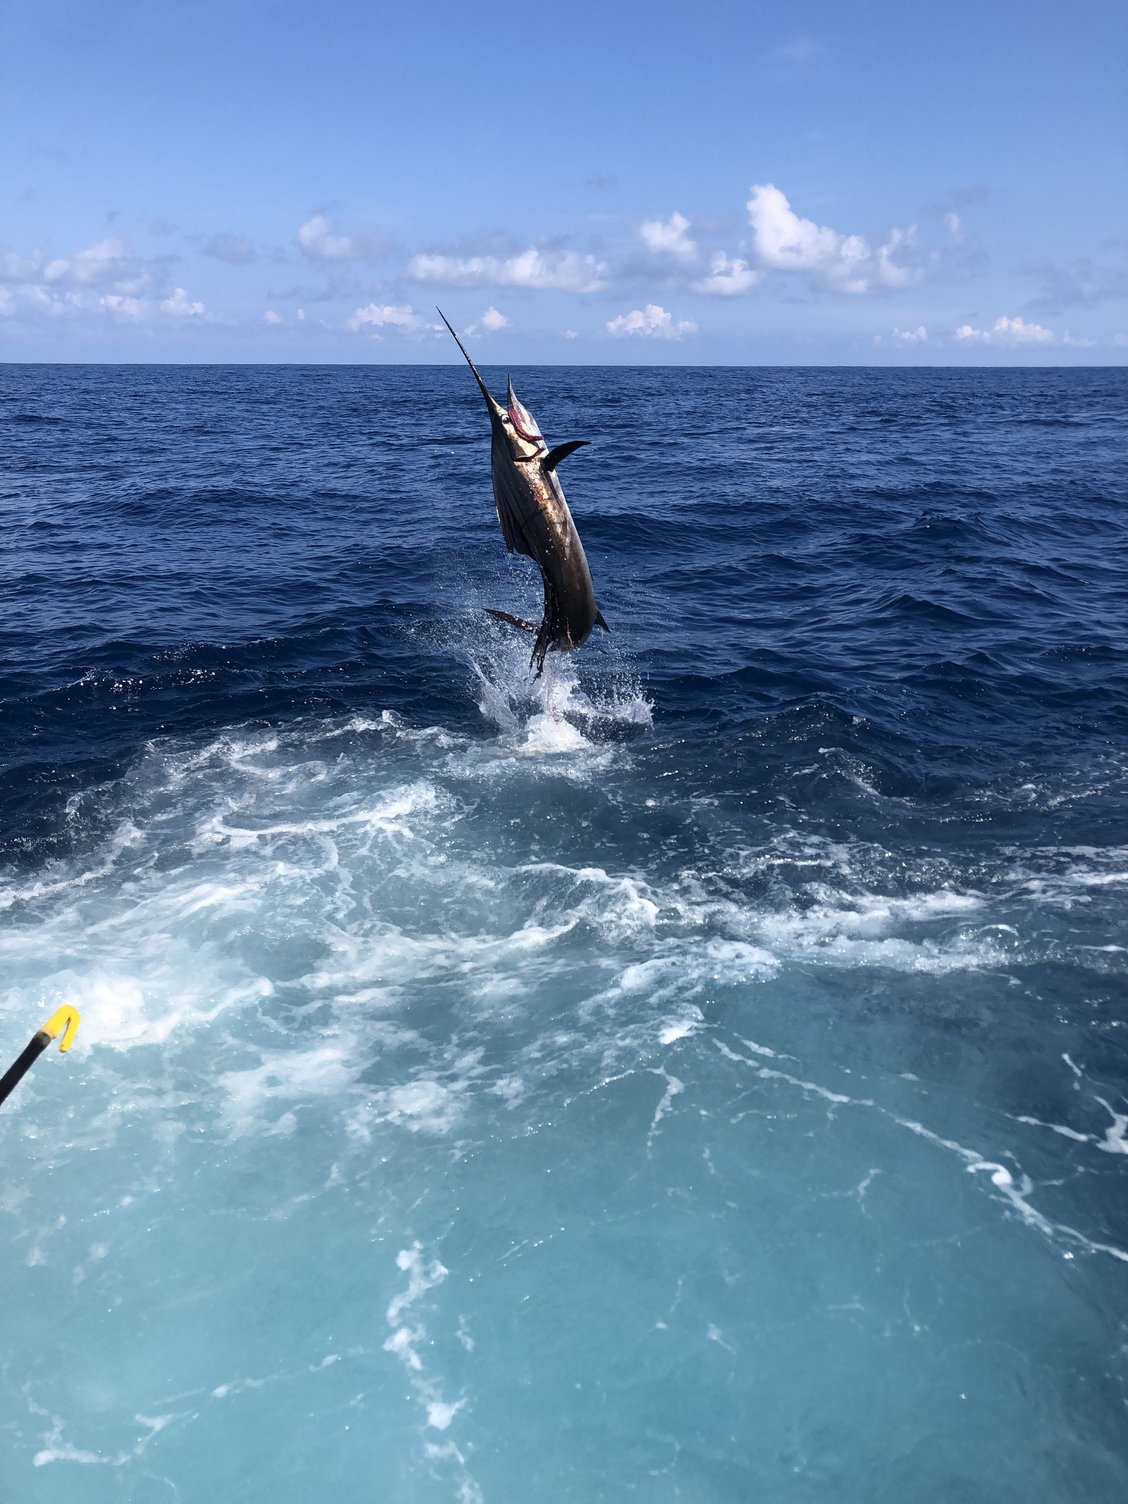 The Best Place for Marlin Fishing in the World - Ecuagringo